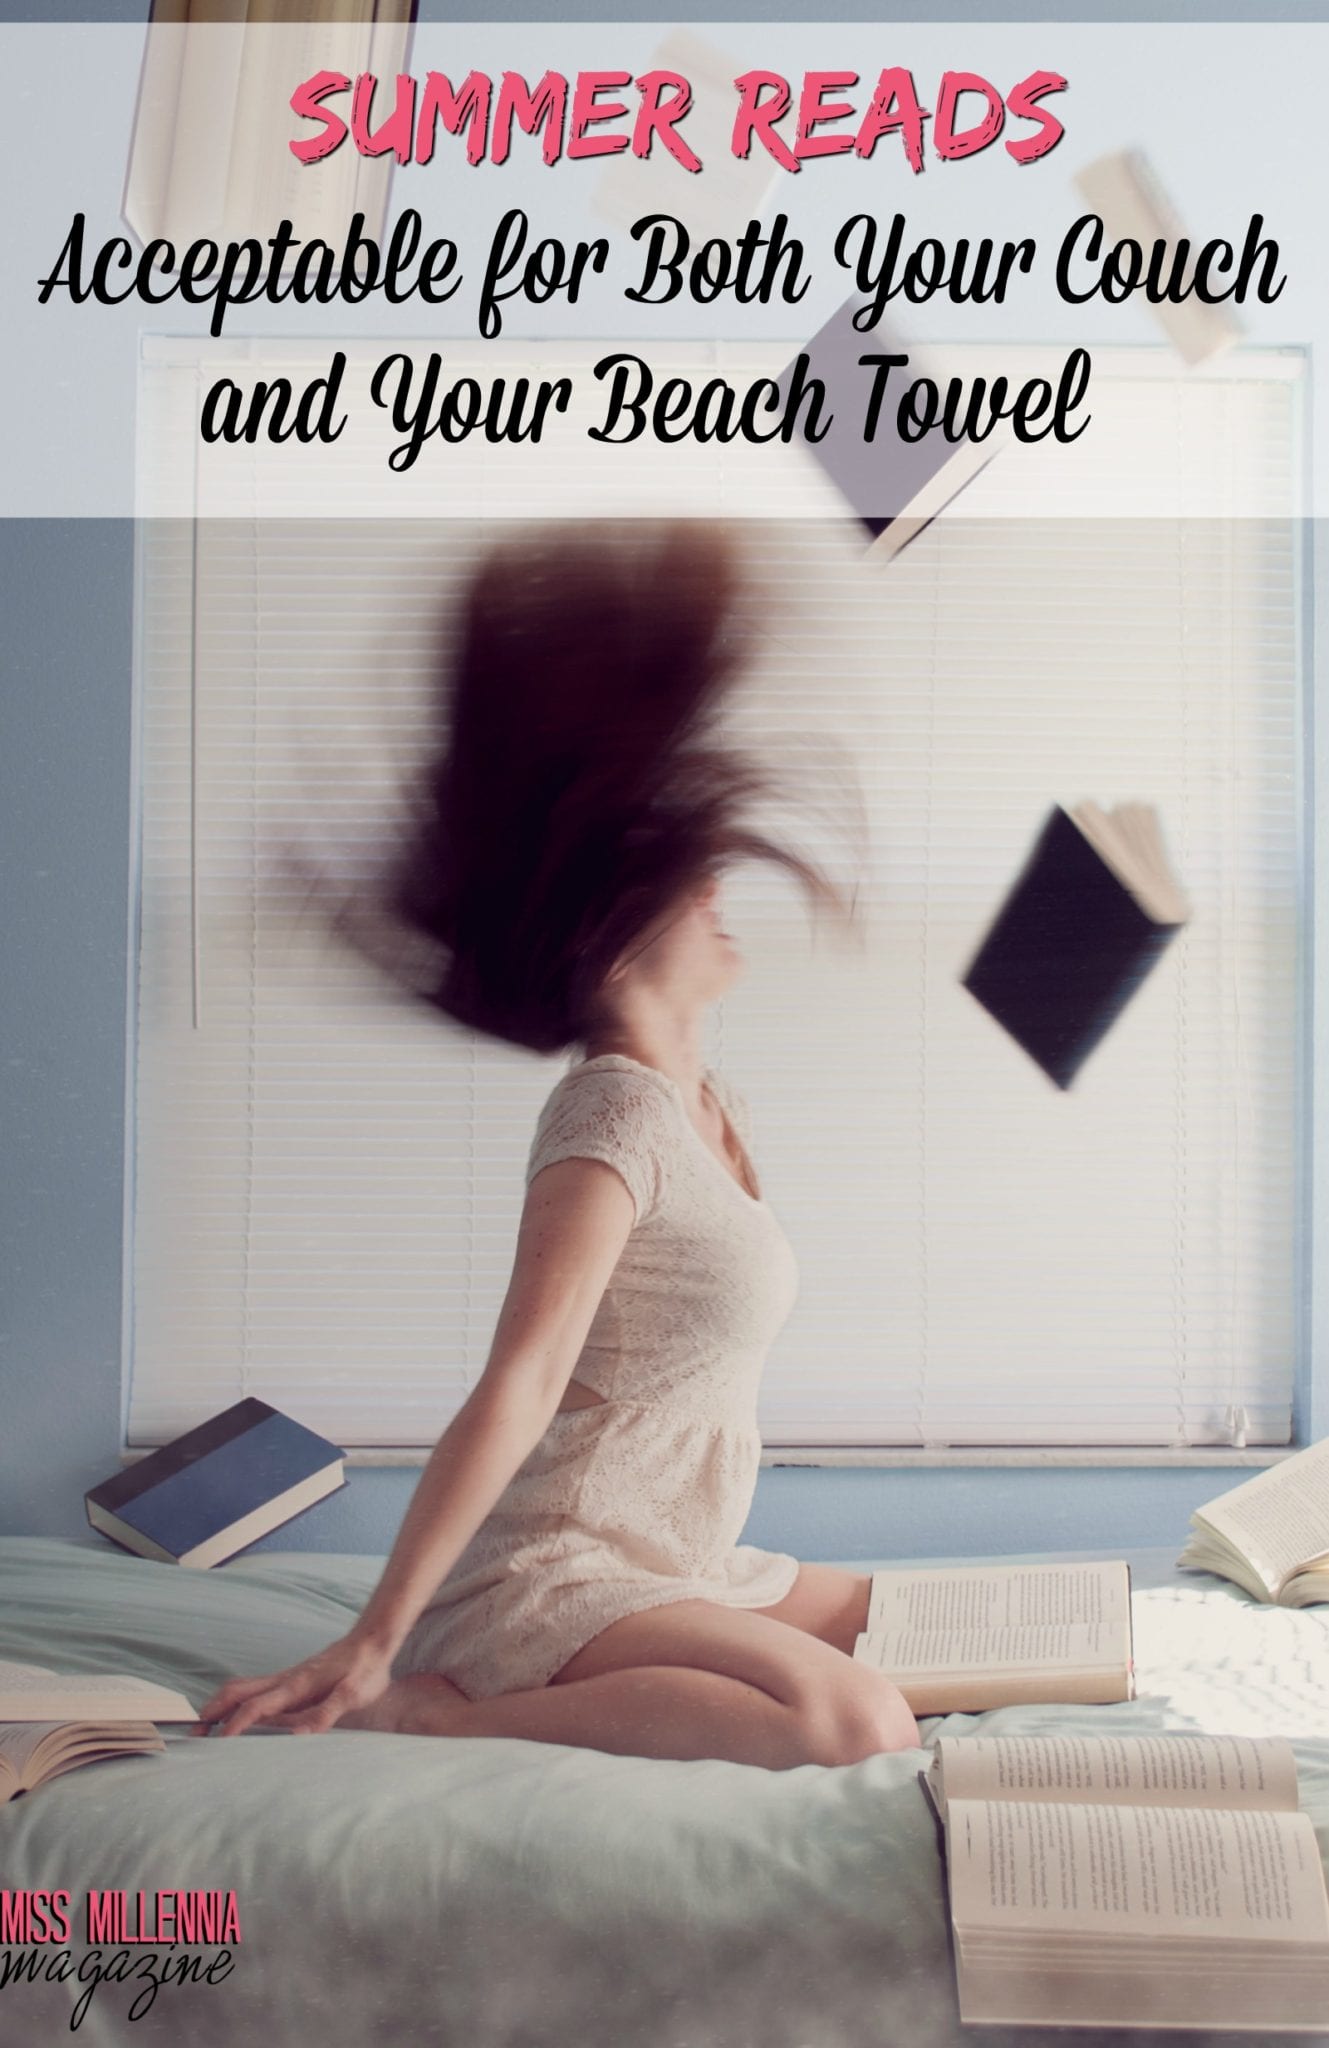 Summer Reads Acceptable for Both Your Couch and Your Beach Towel